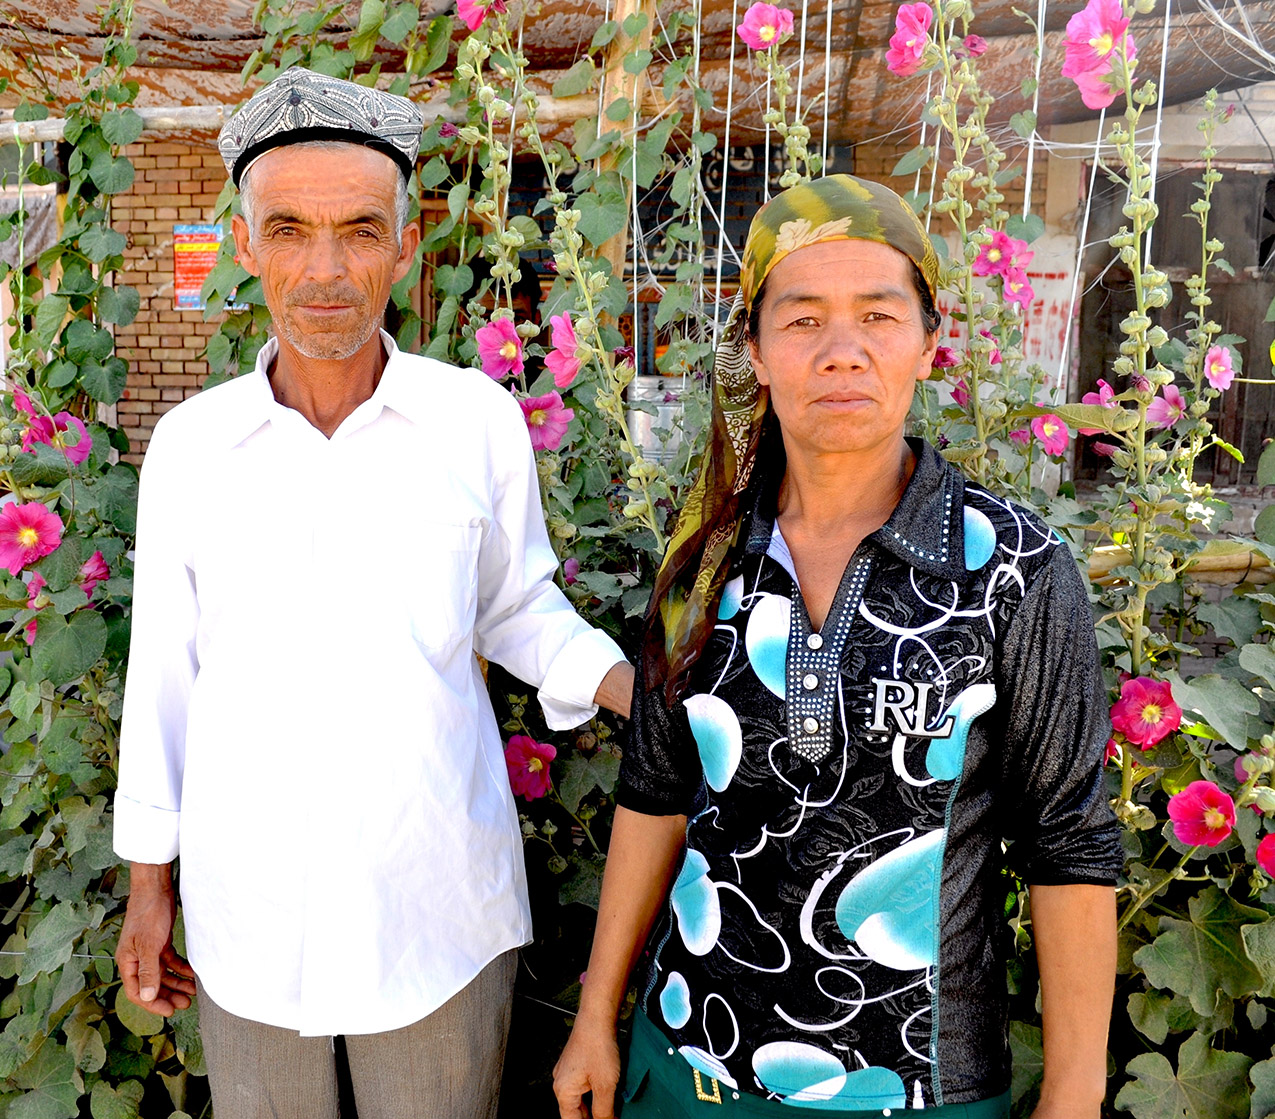 A man in a white shirt and a woman with a headscarf wearing a Ralph Lauren shirt in front of a trellis of pink hollyhocks in Kashgar, China